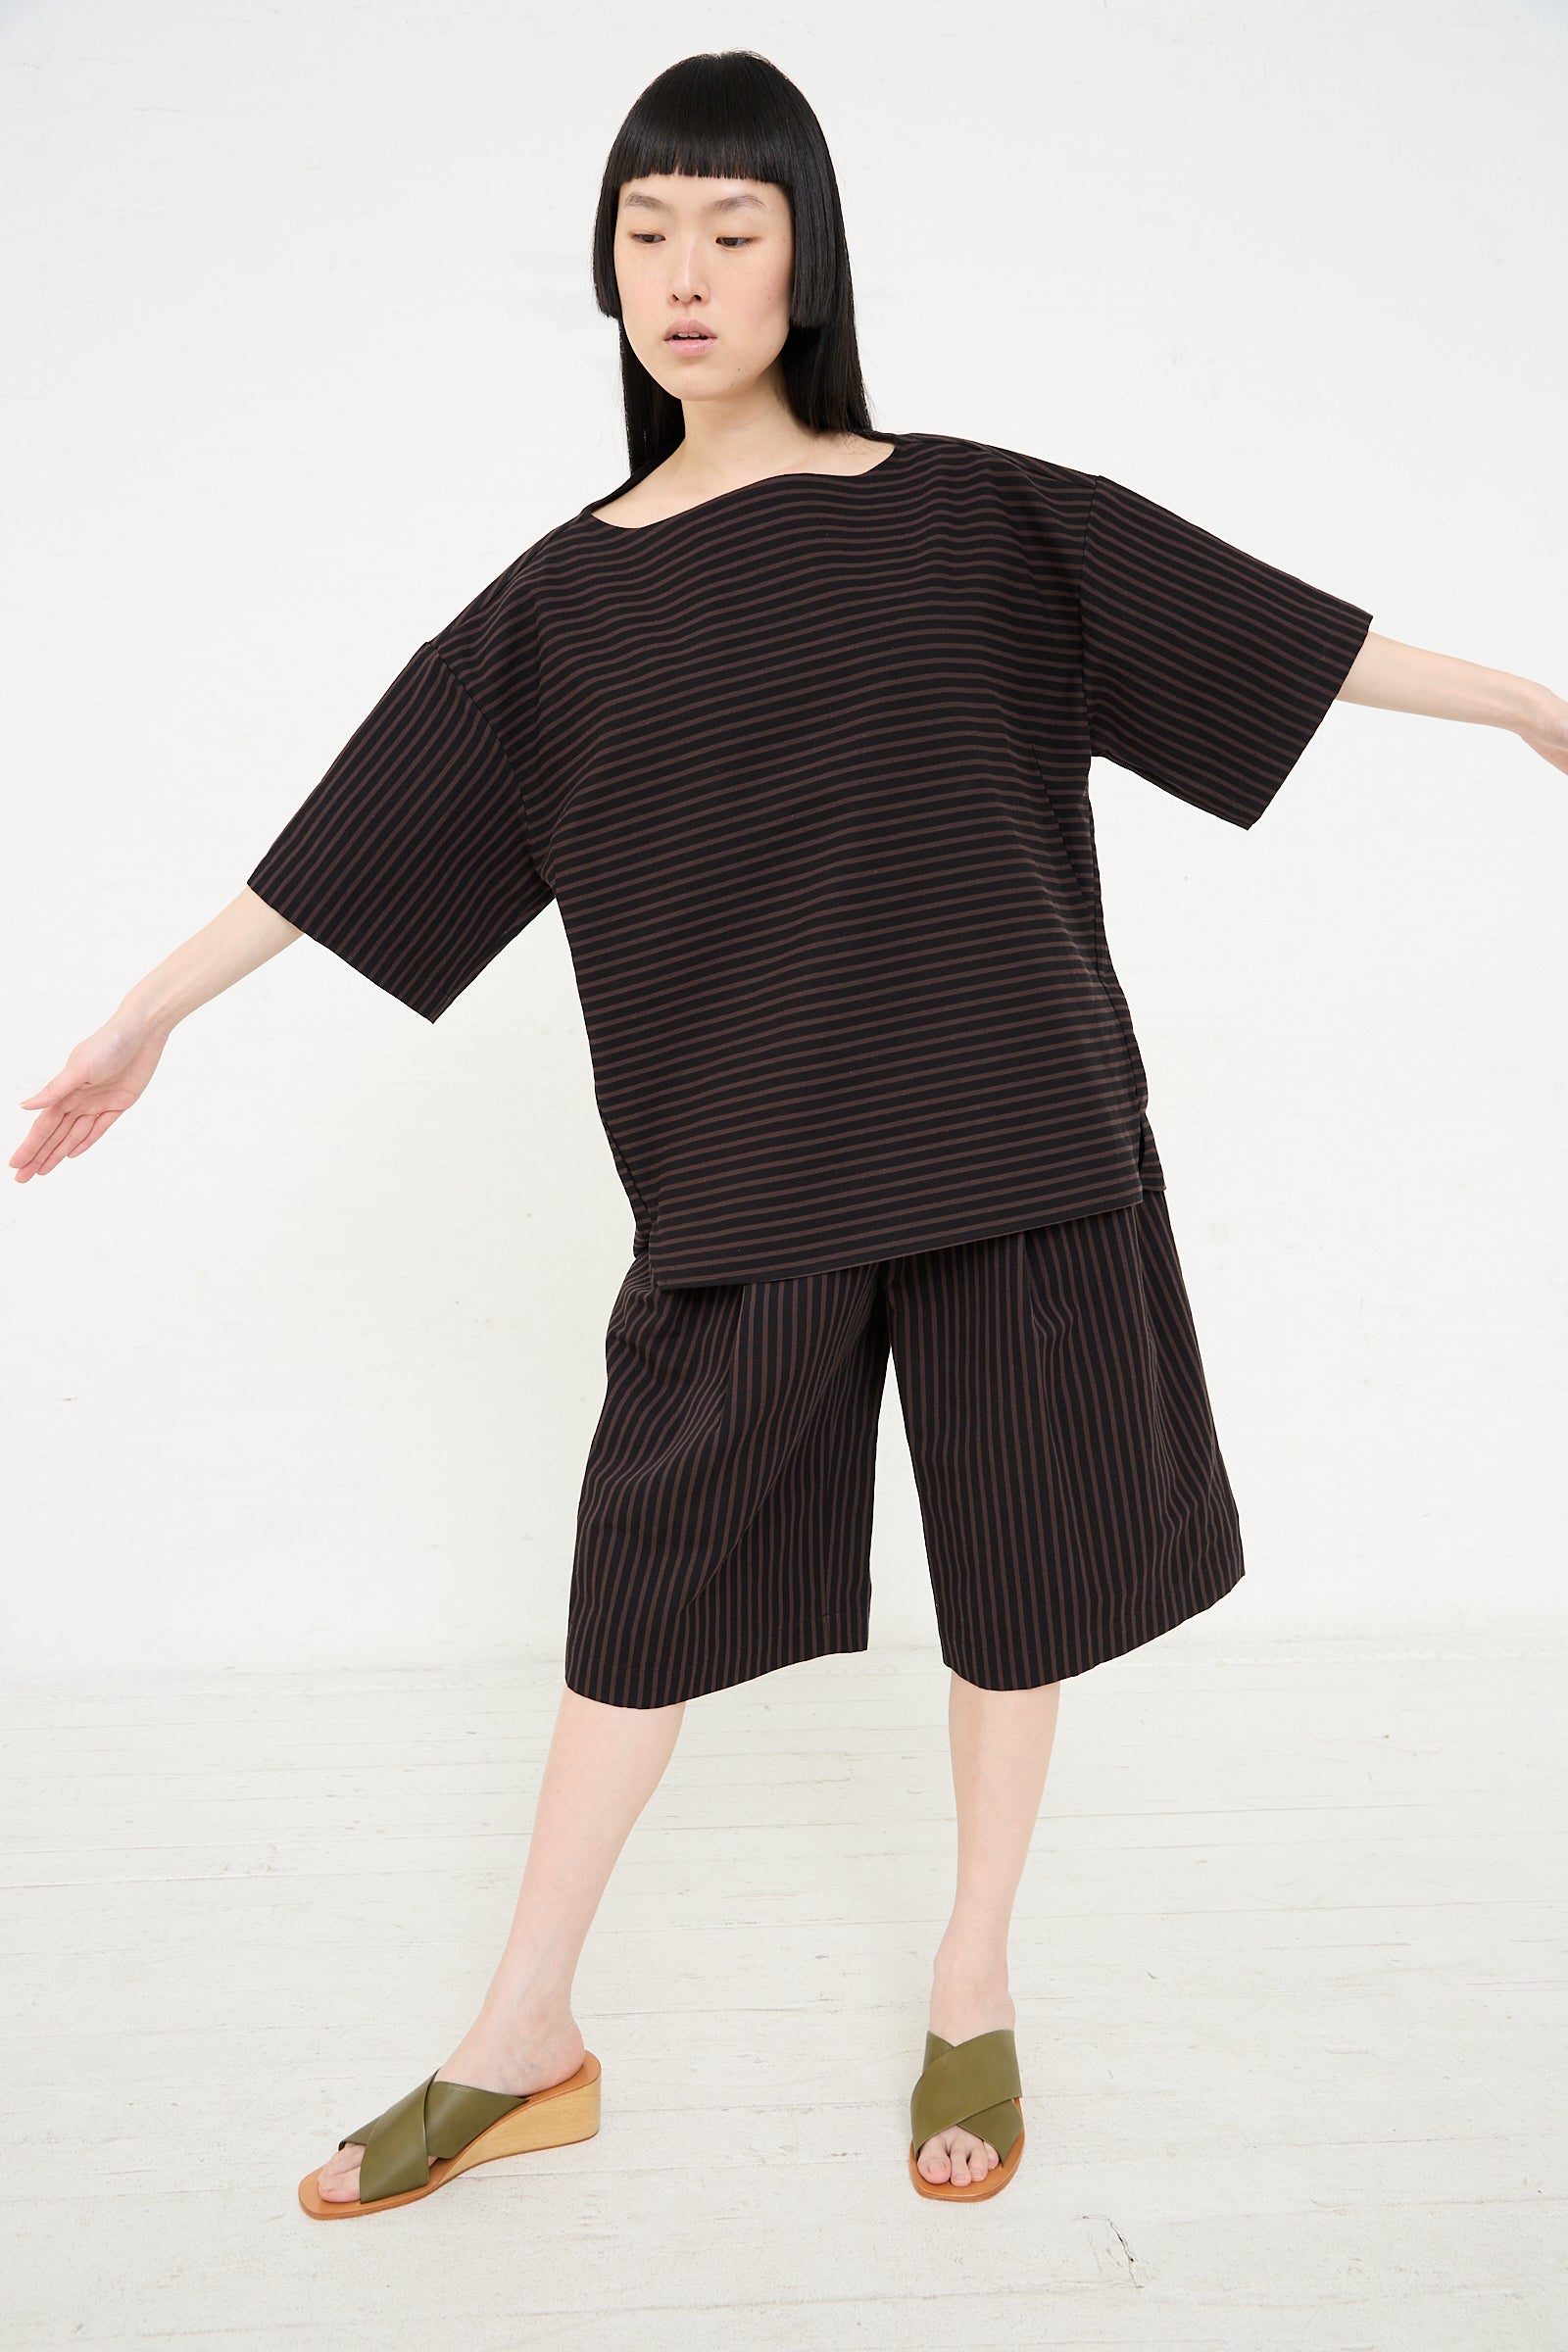 A woman in a Rachel Comey Ode Top in Black with a boatneck collar posing with arms extended.